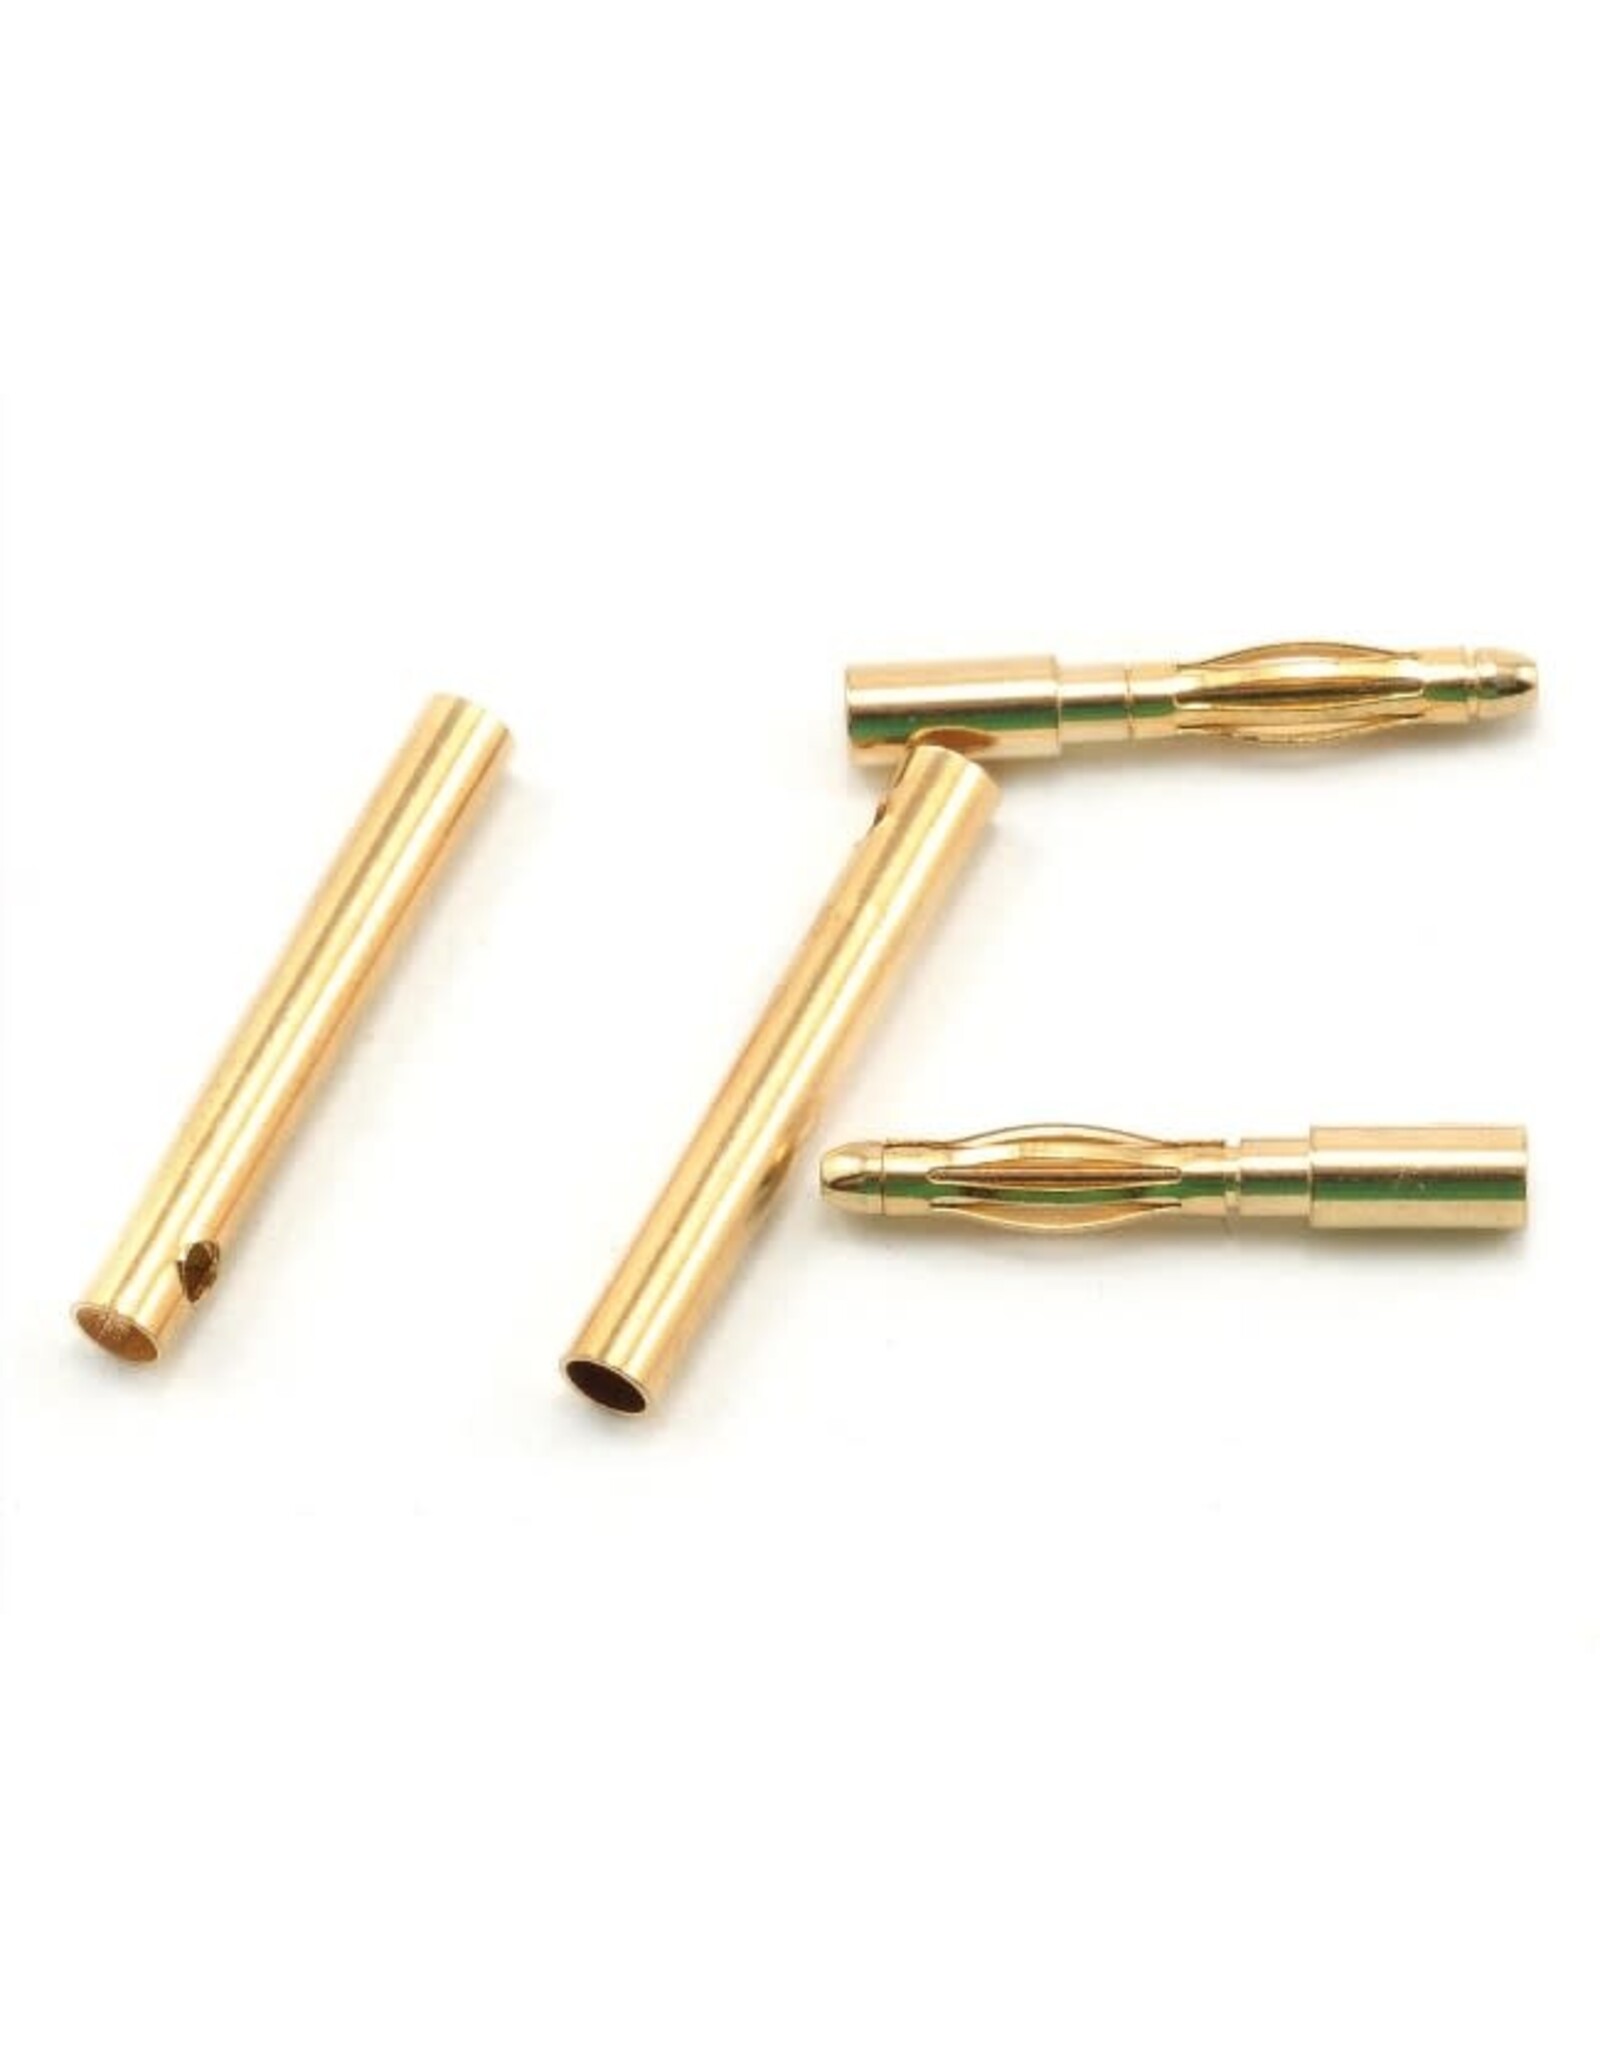 Protek RC 2.0mm Gold Plated Inline Connectors (2 Male/2 Female)